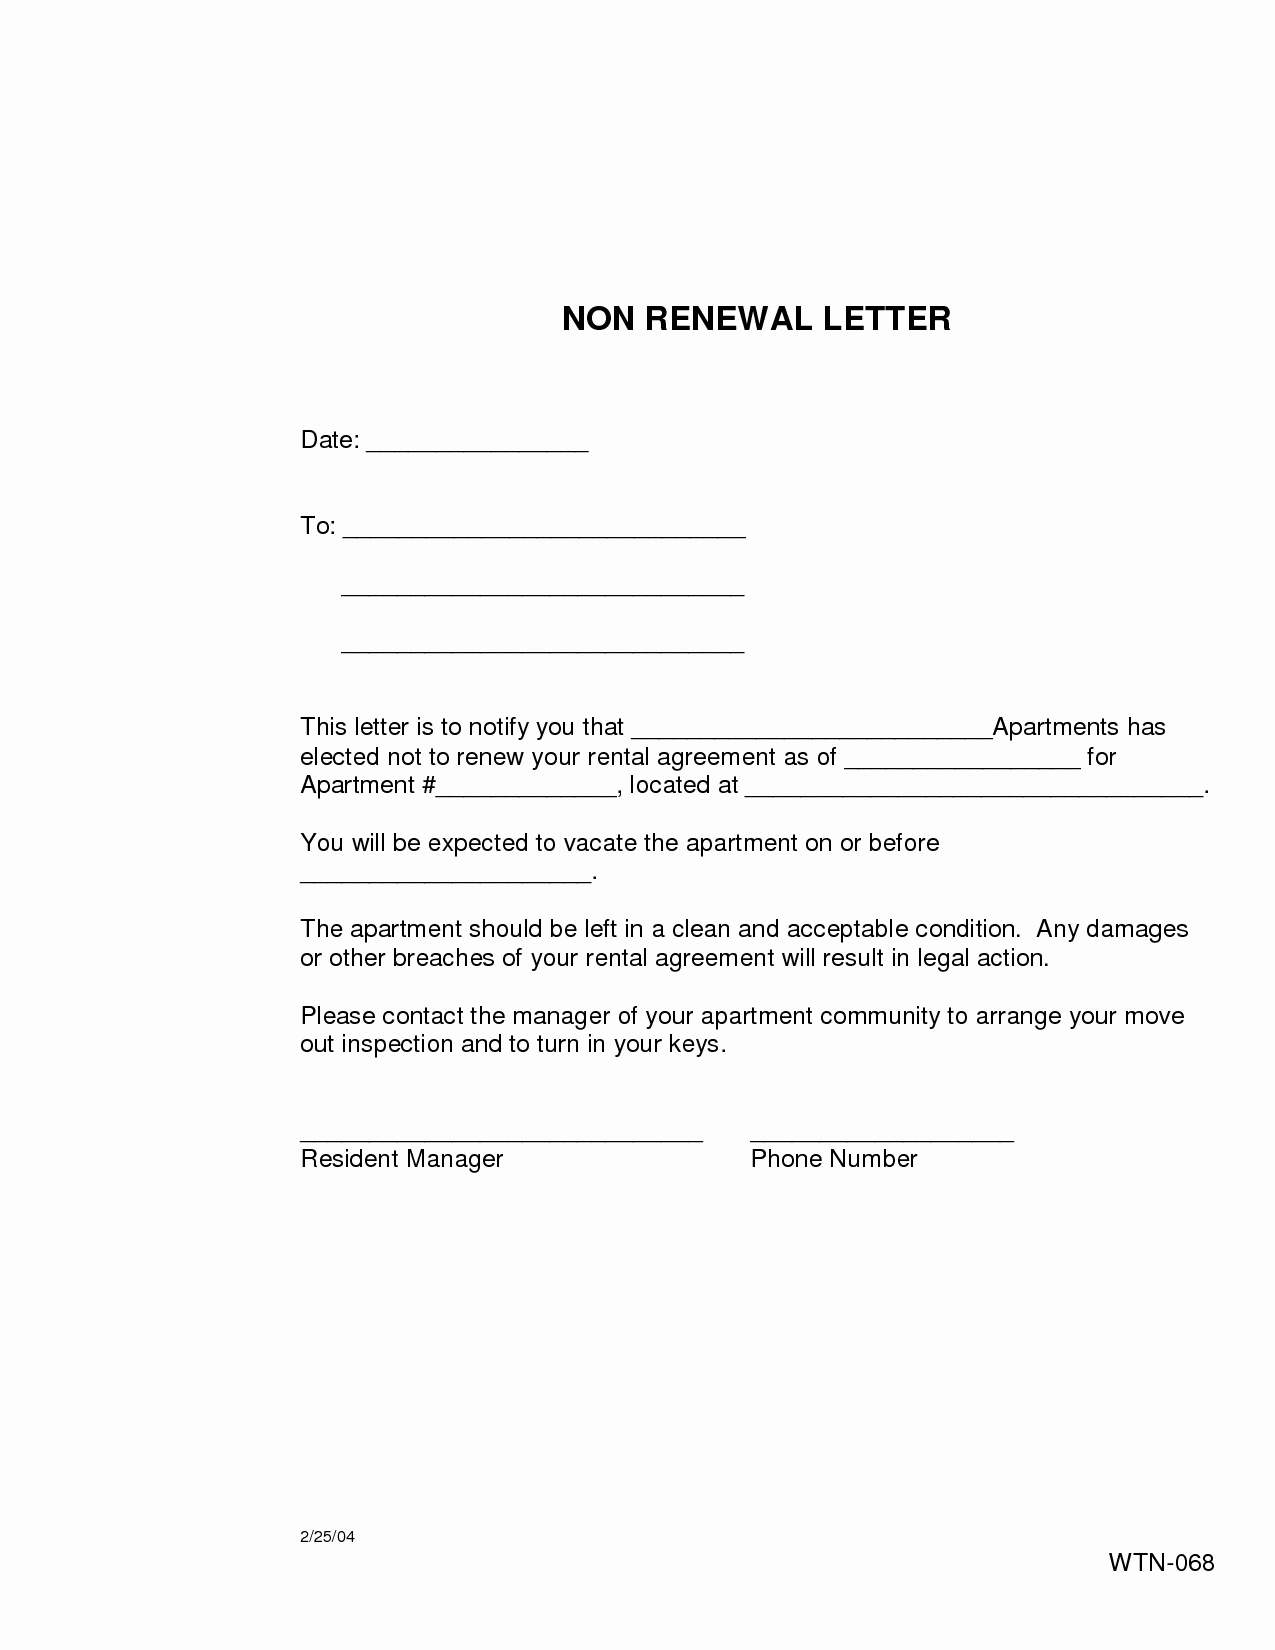 Letter for Not Renewing Lease Fresh Apartment Renewal Letter Latest Bestapartment 2018